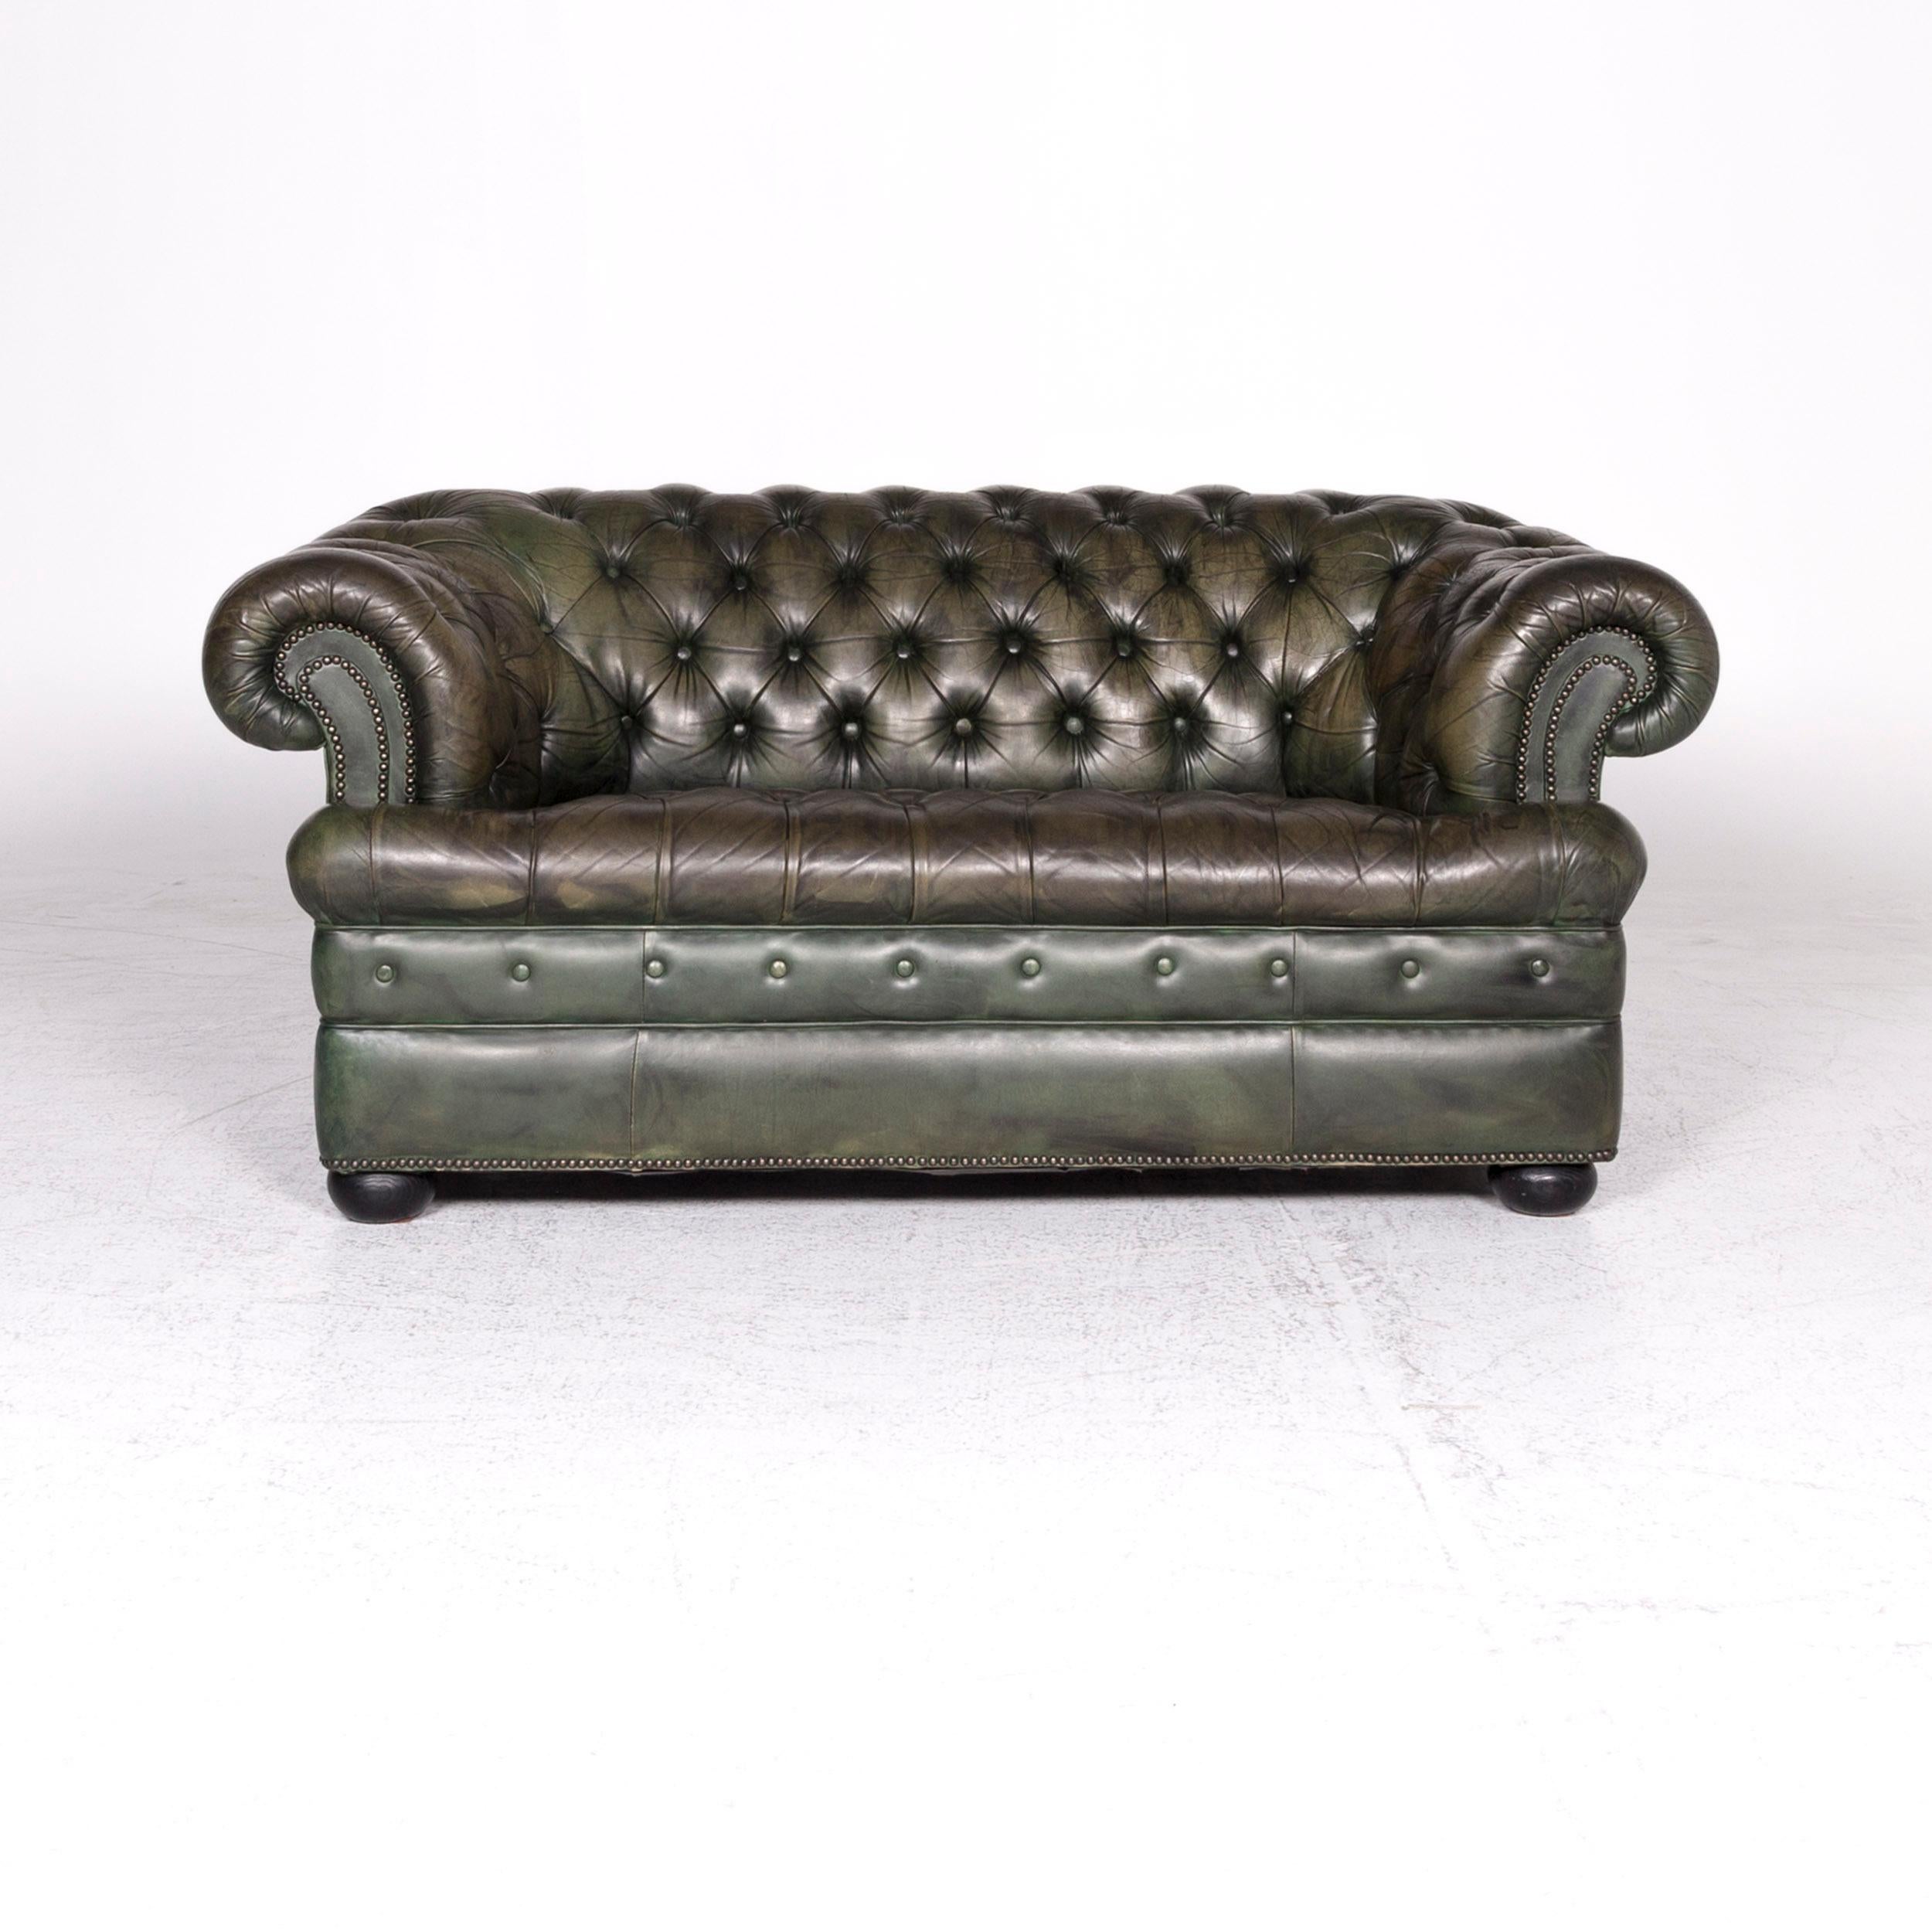 We bring to you a Rochester Chesterfield leather sofa green two-seat couch.

Product measurements in centimeters:

Depth 96
Width 169
Height 78
Seat-height 47
Rest-height 72
Seat-depth 46
Seat-width 101
Back-height 37.
 